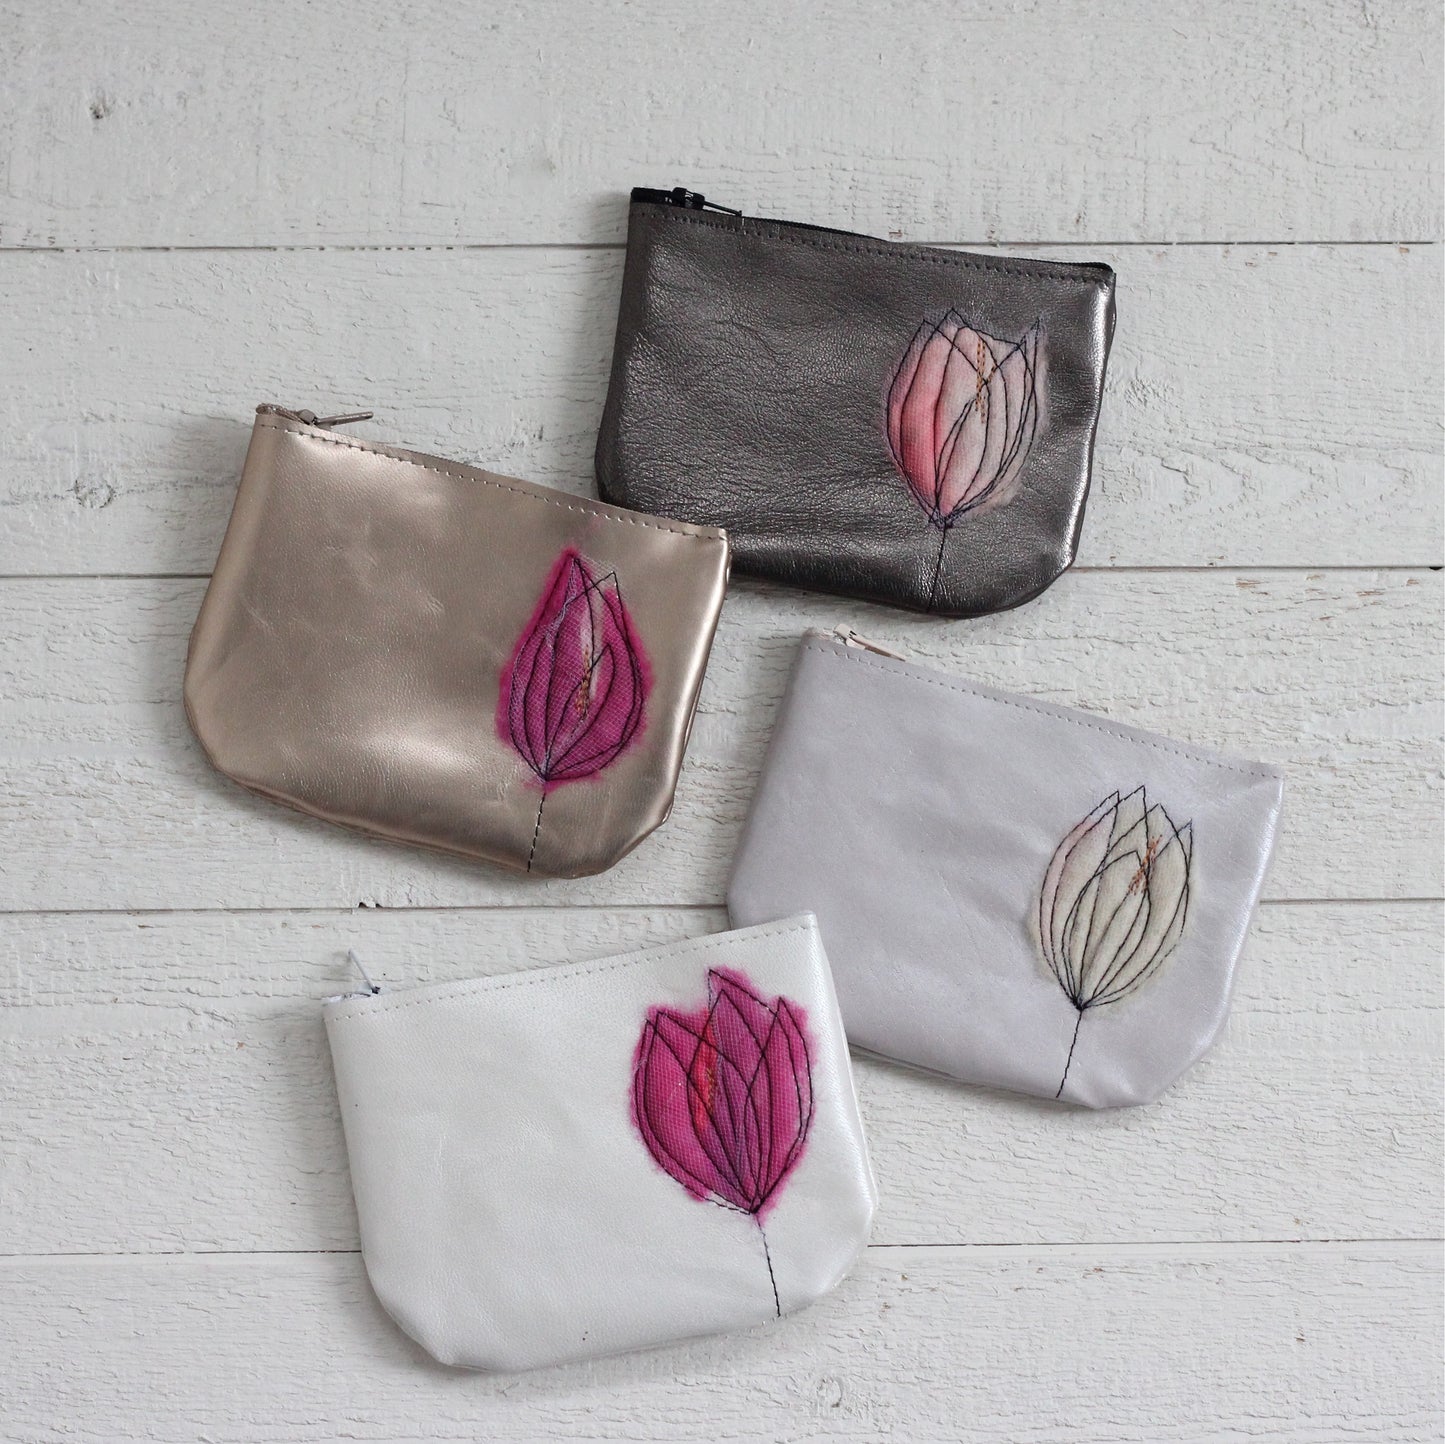 Leather Coin Purse - Pewter & Blush